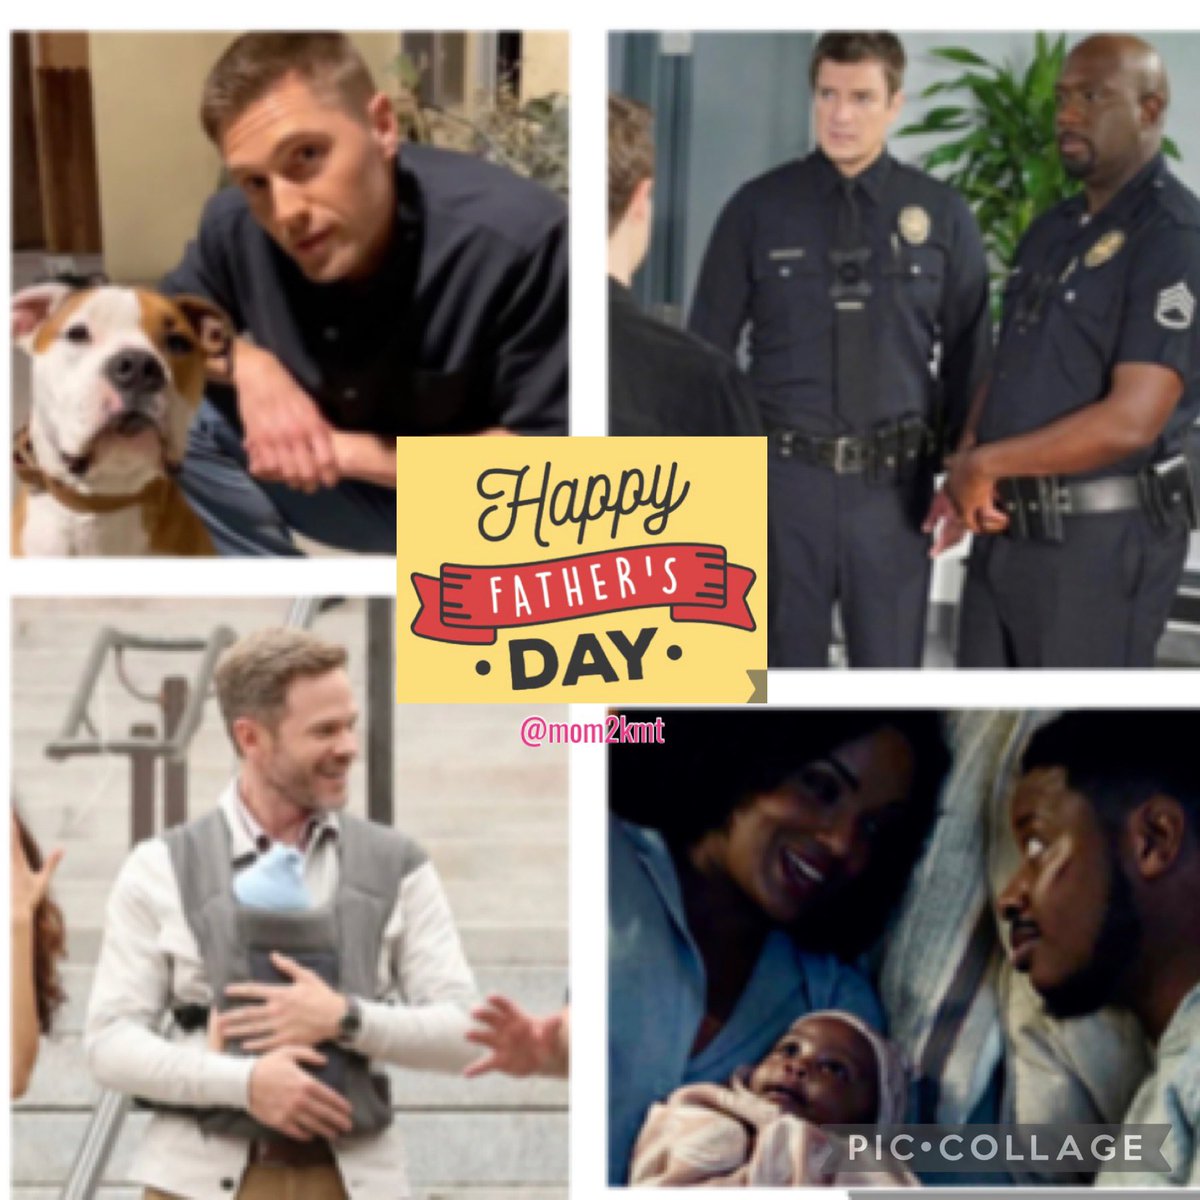 Happy Father’s Day to #TheRookie dads #WadeGrey #WesleyEvers #JohnNolan #JamesMurray and #TimBradford #dogdad